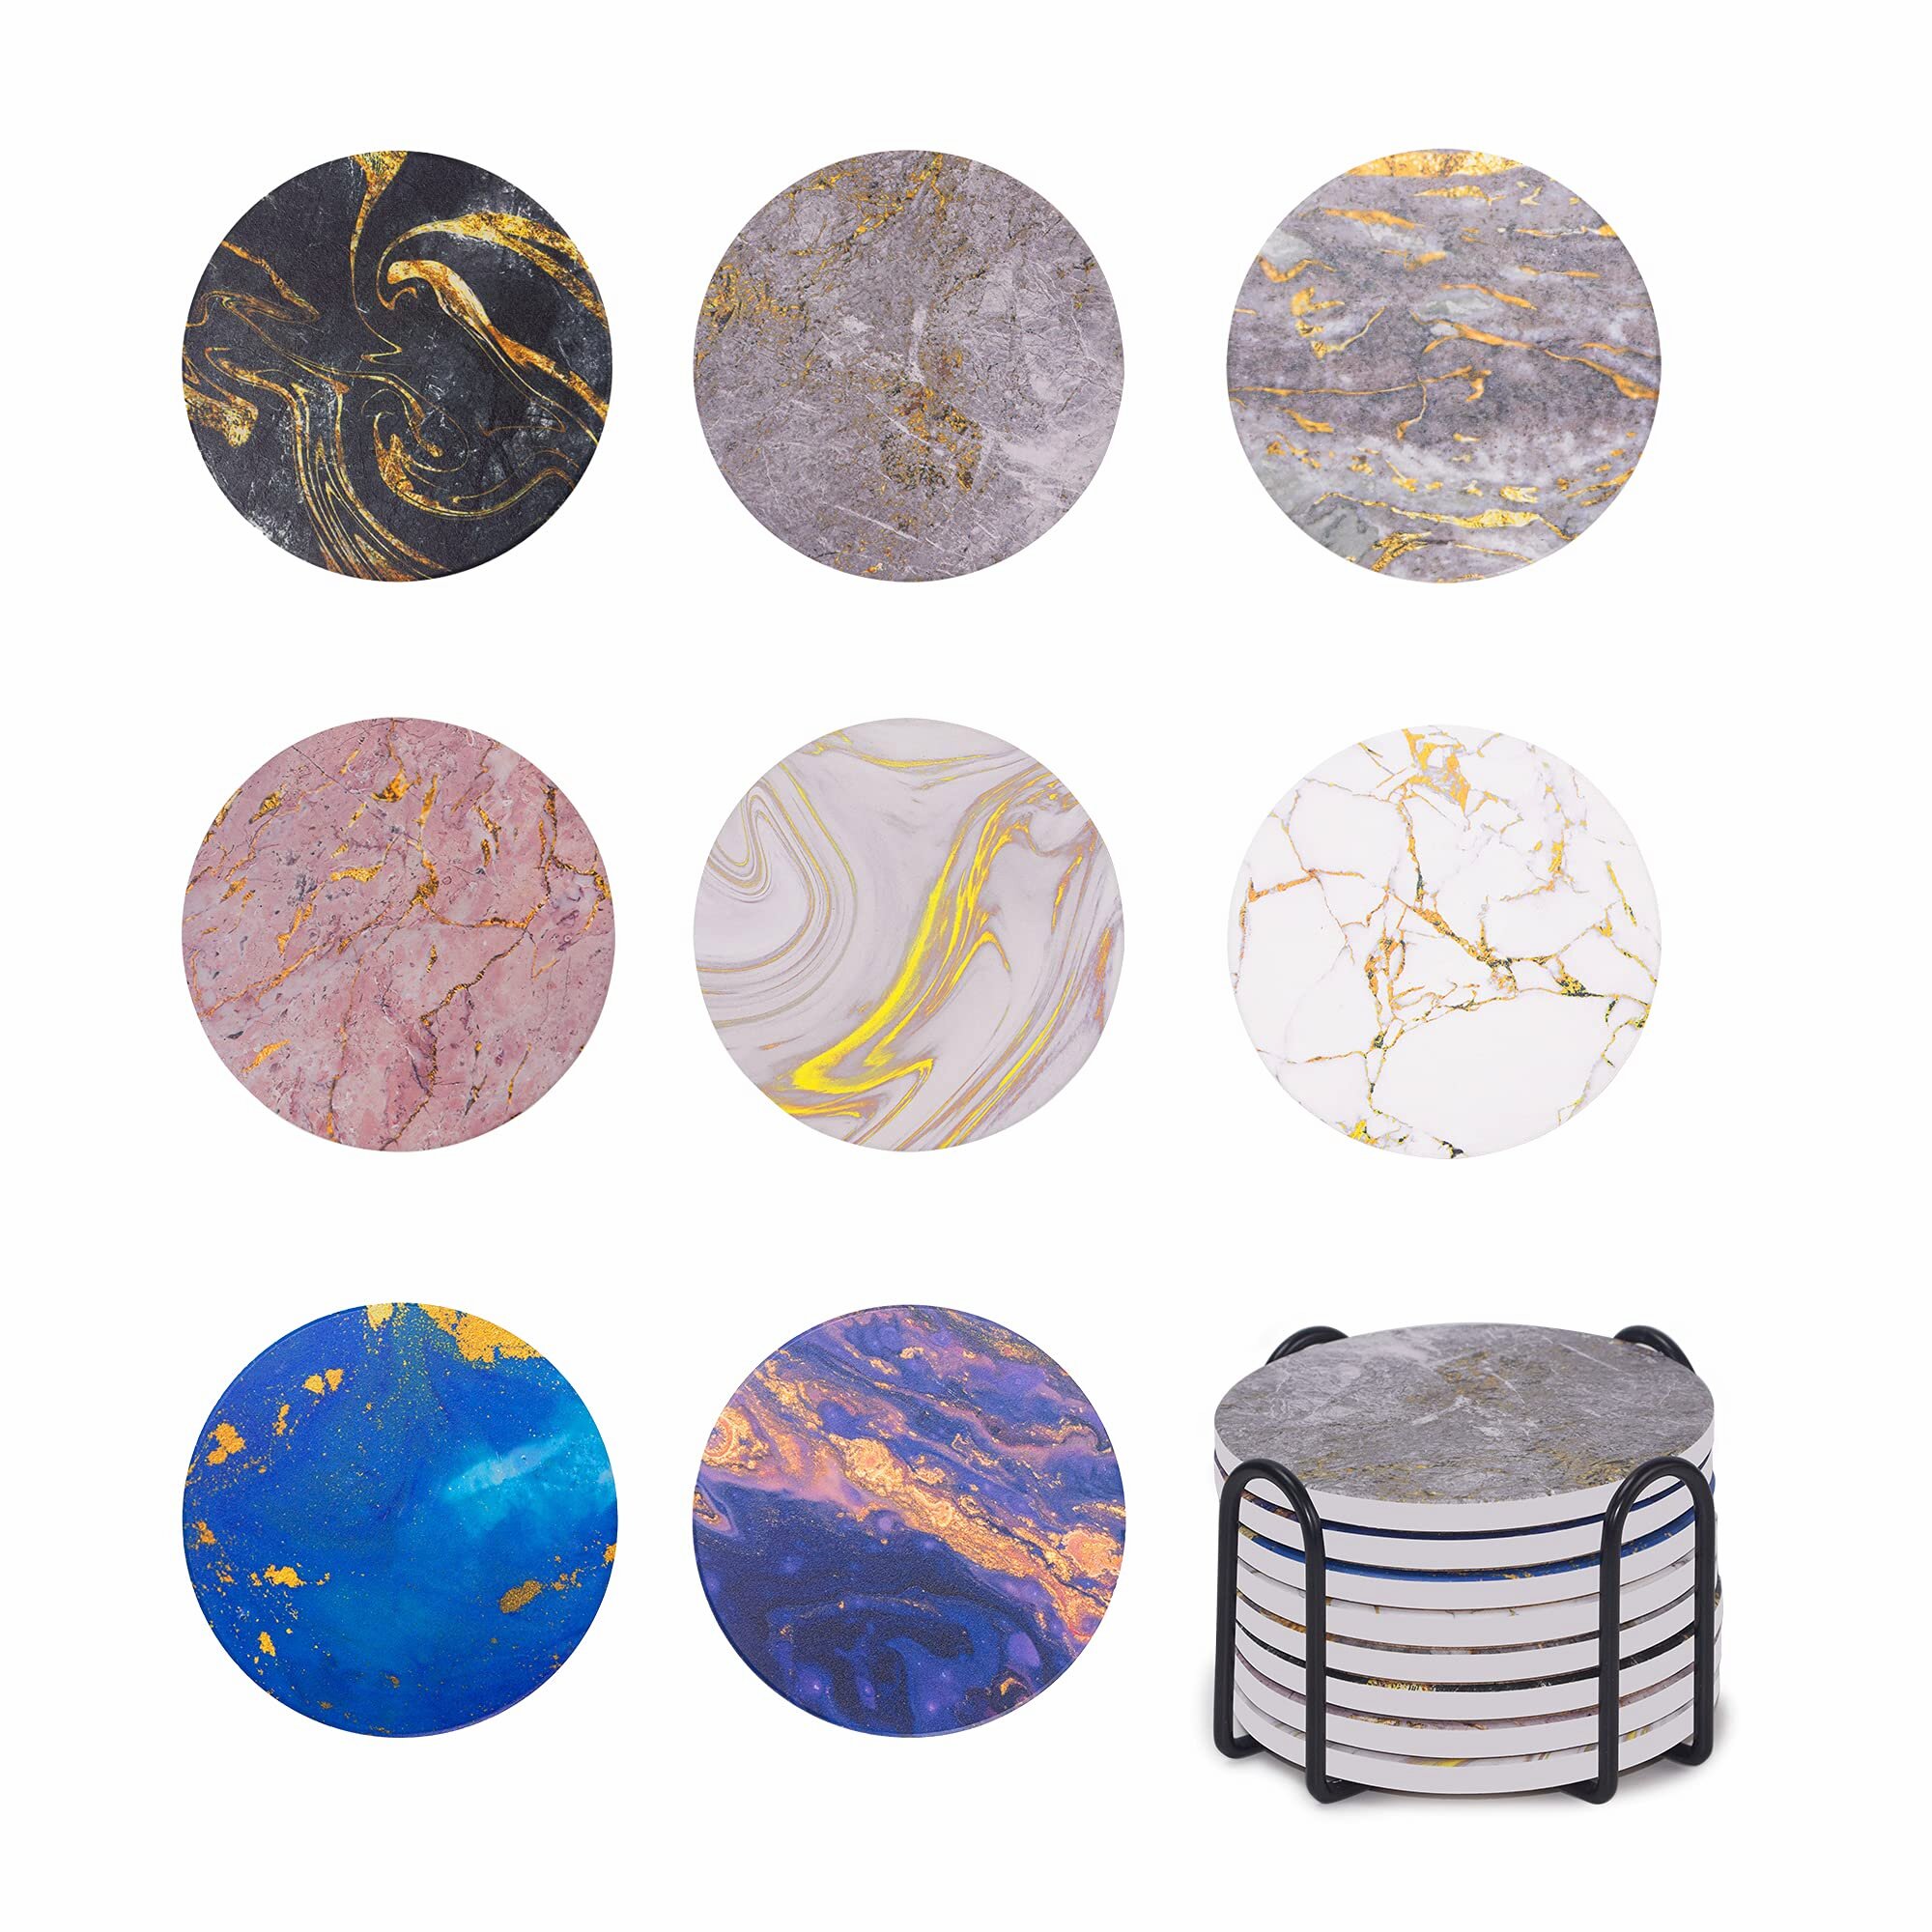 CYTong Absorbent Coaster Sets of 8,Coasters for Drinks Cork Base,Marble Style Ceramic Drink Coaster,for Friends Birthday,Housewarming,Kitchen Room,Bar Decorations 